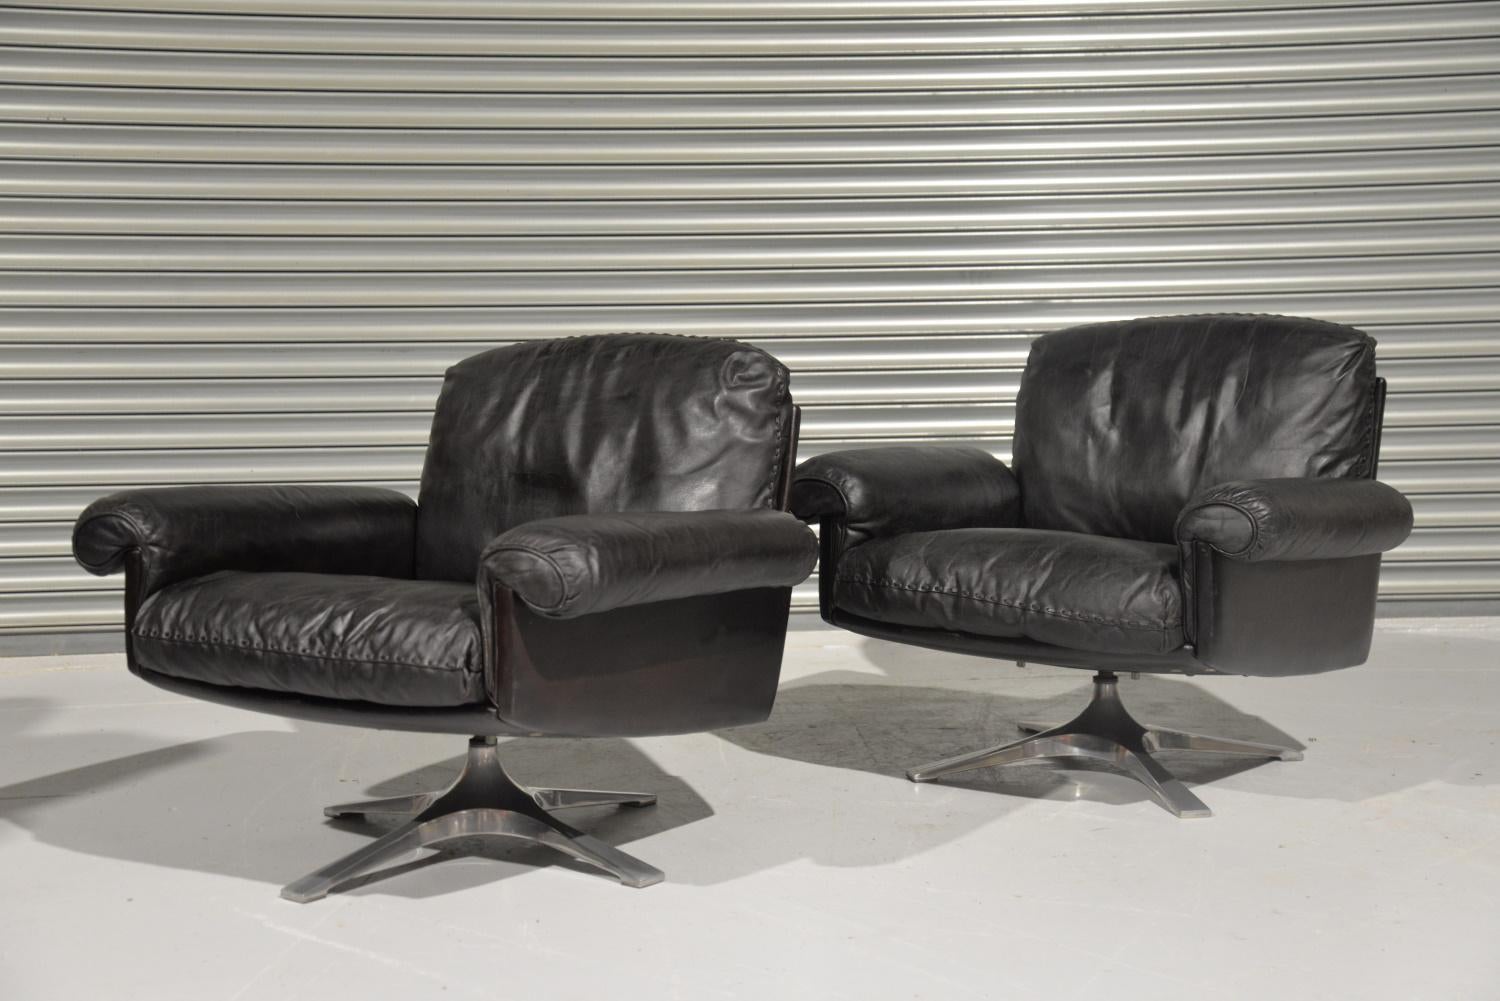 Discounted airfreight for our US and International customers (from 2 weeks door to door)

We are delighted to bring to you a pair of highly desirable retro De Sede DS-31 swivel lounge armchairs in beautiful soft dark brown leather with whipstitch